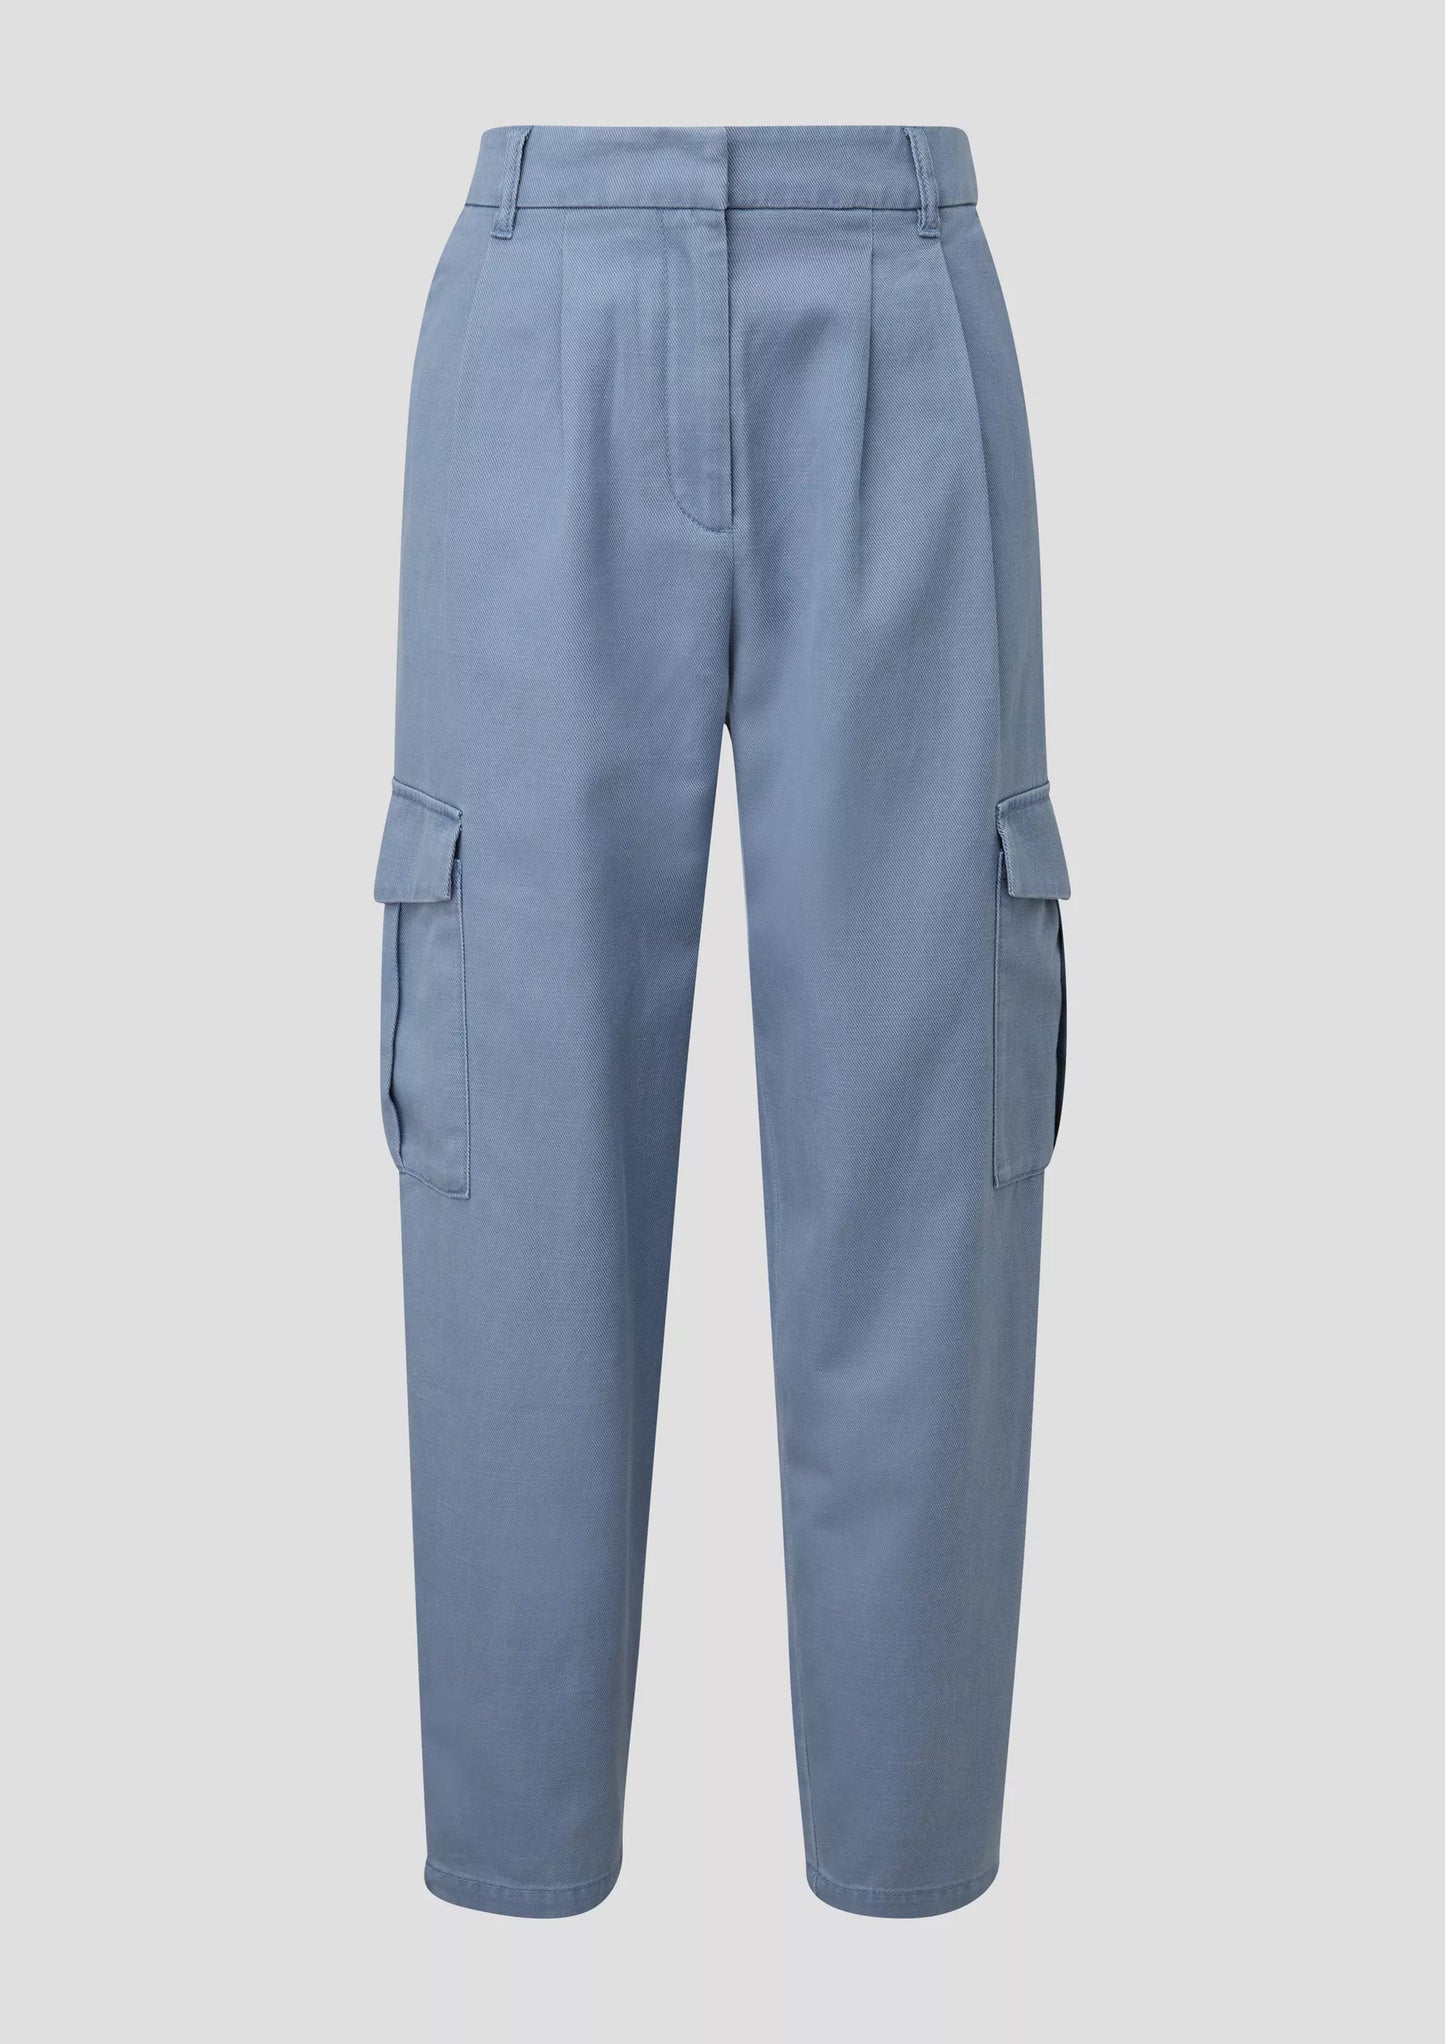 S.Oliver Twill Cargo Trousers-Blue